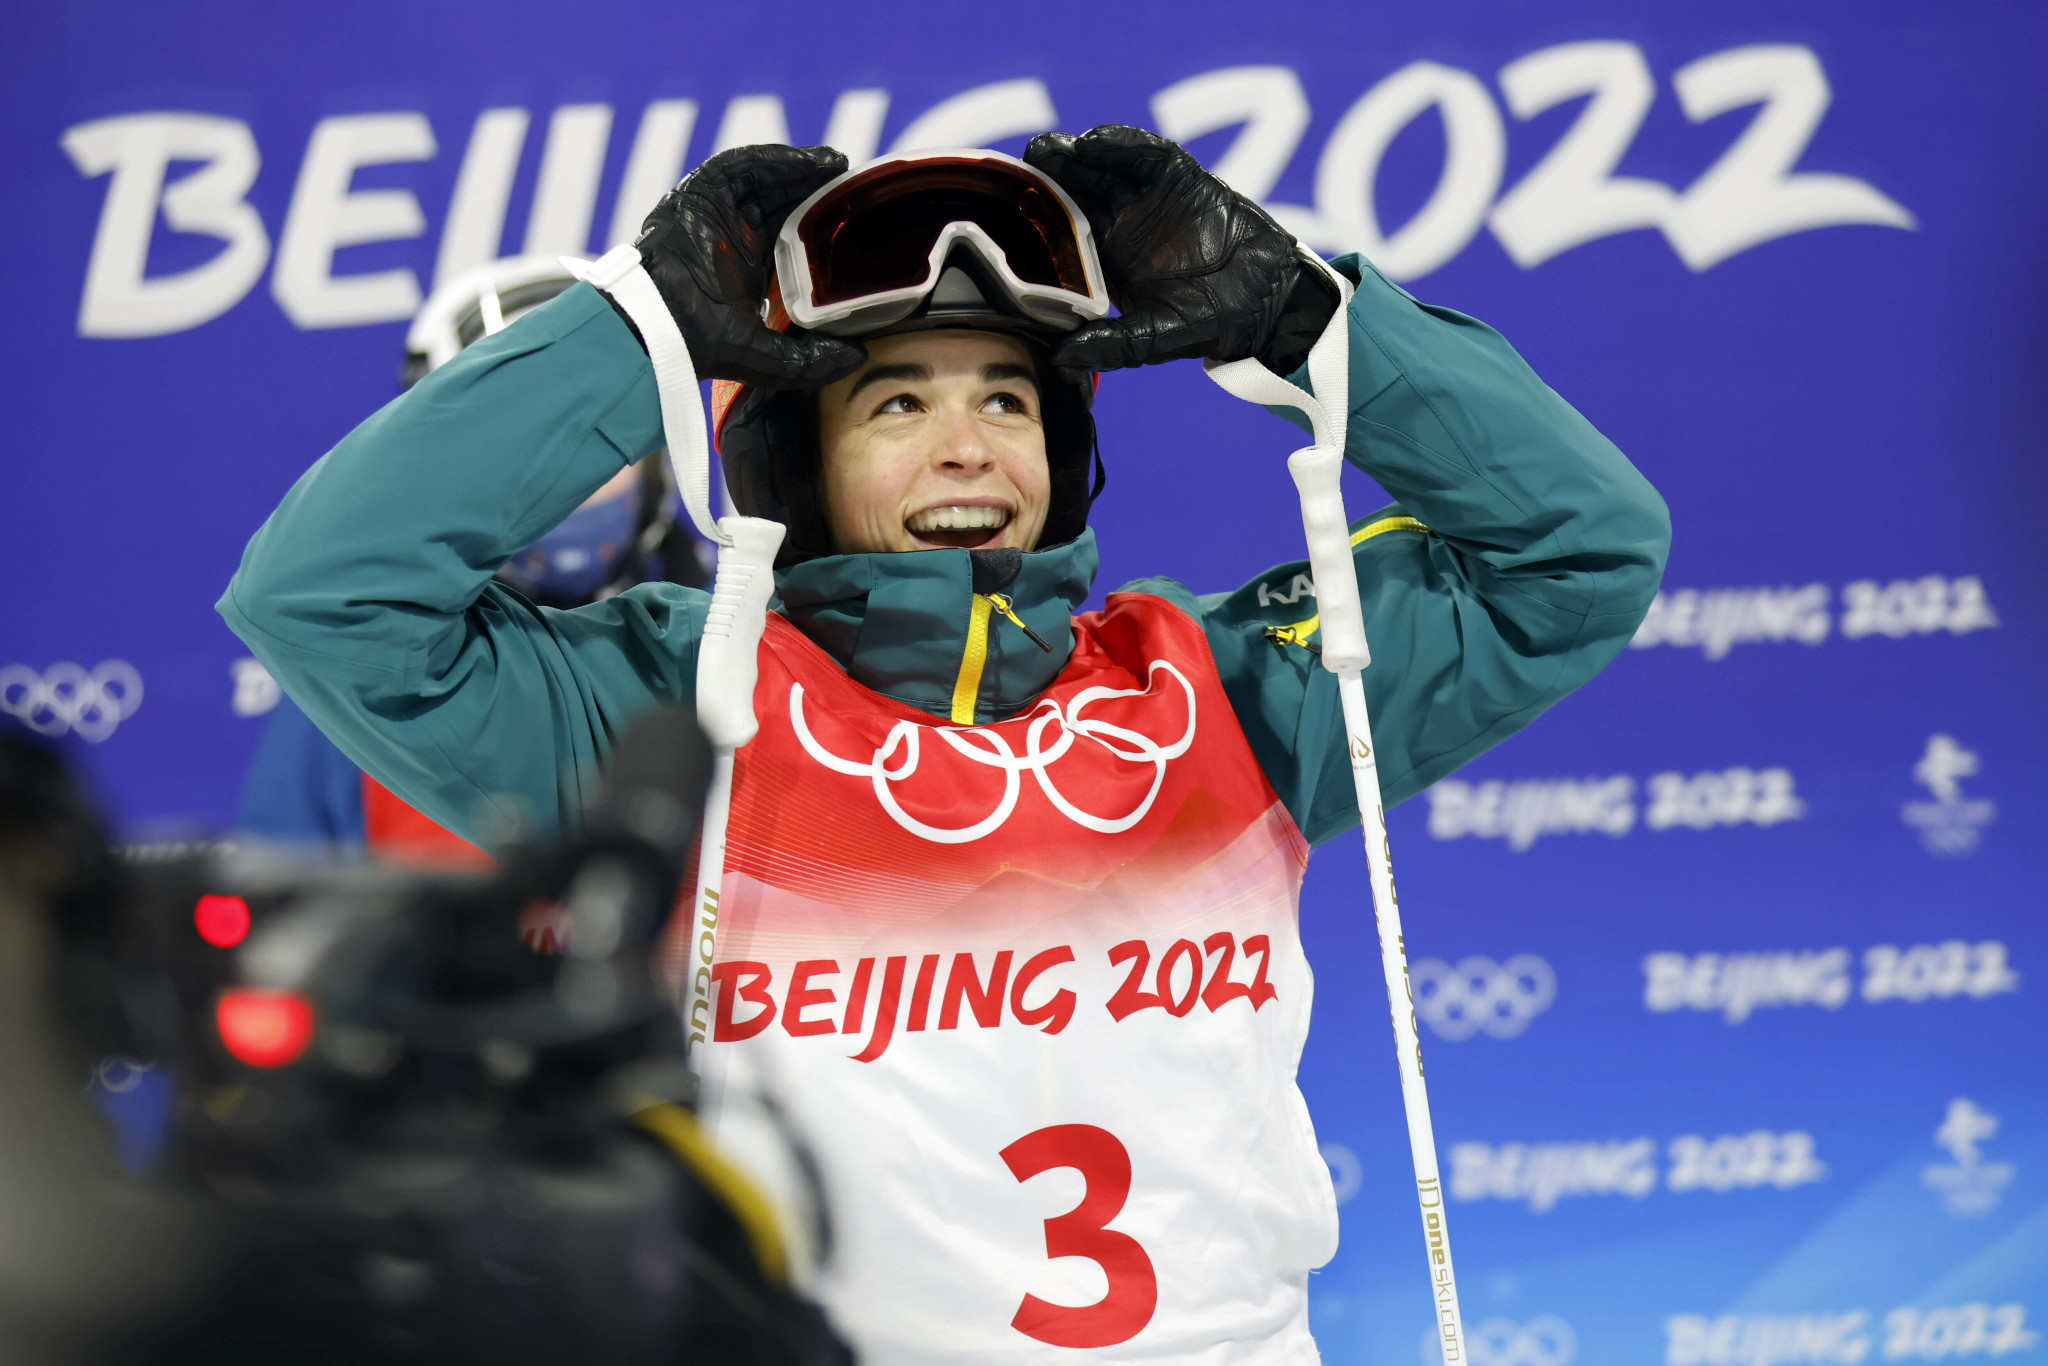 Australia's Milan Cortina 2026 hopefuls given "certainty" with Government funding pledge